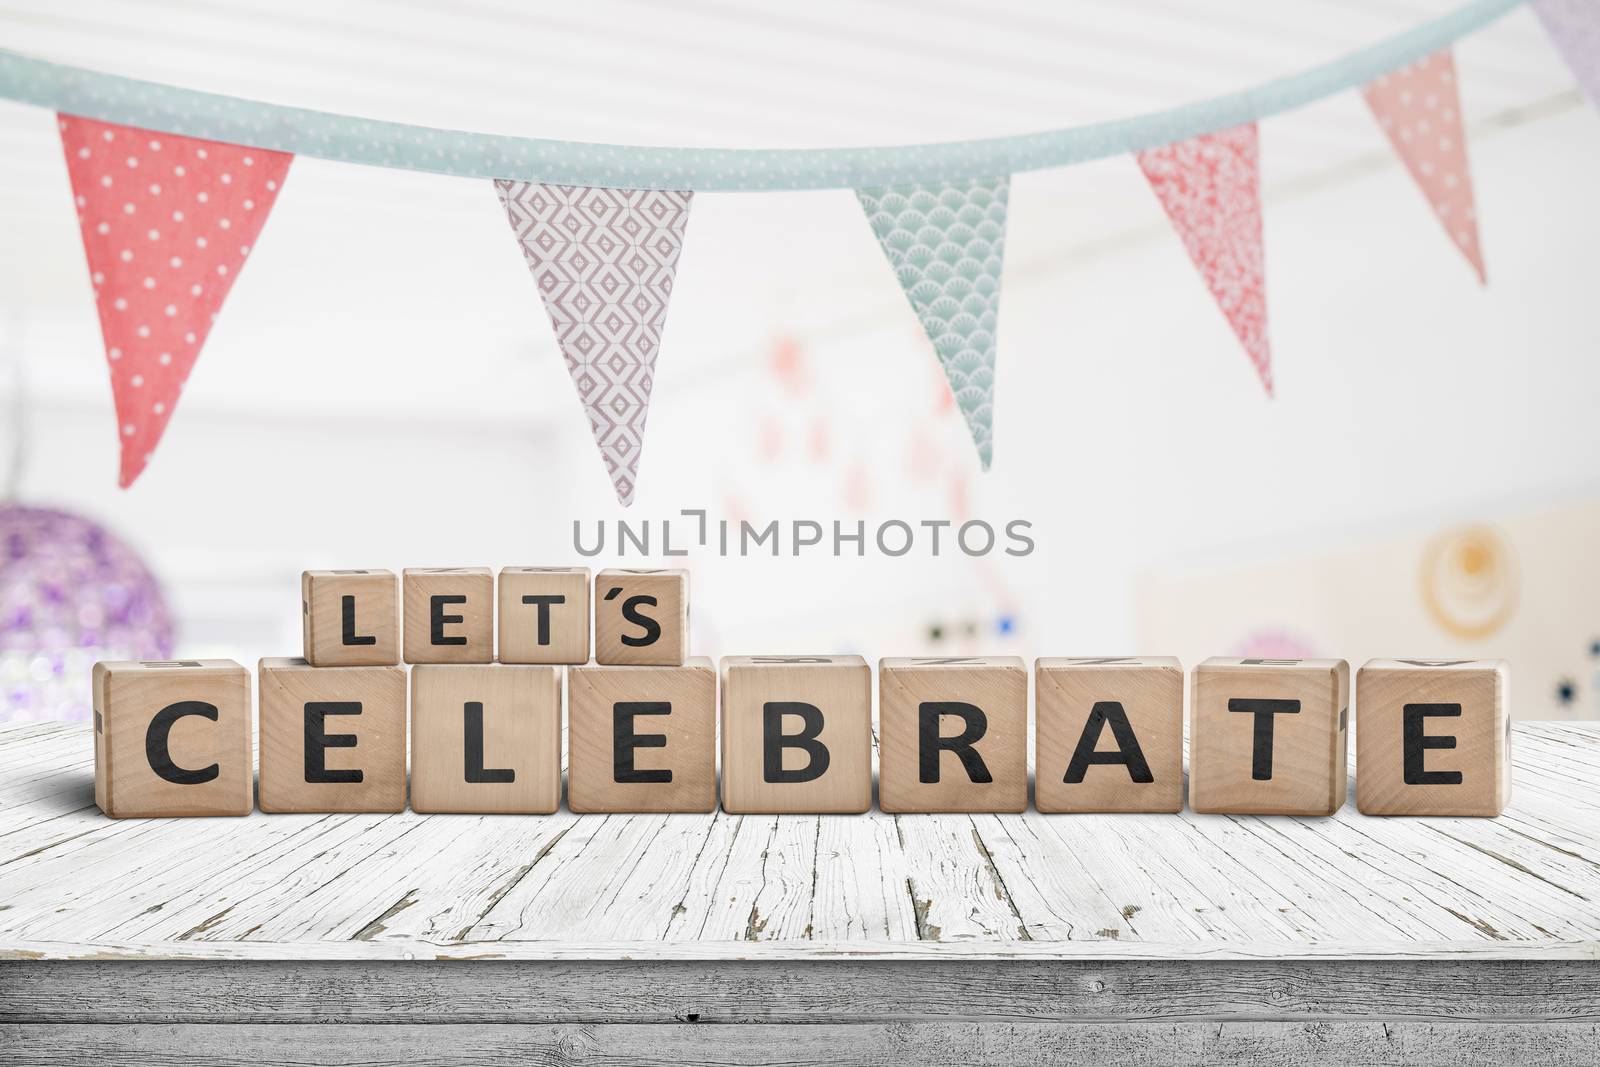 Let's celebrate birthday greeting in a bright kids room with flags hanging from the ceiling